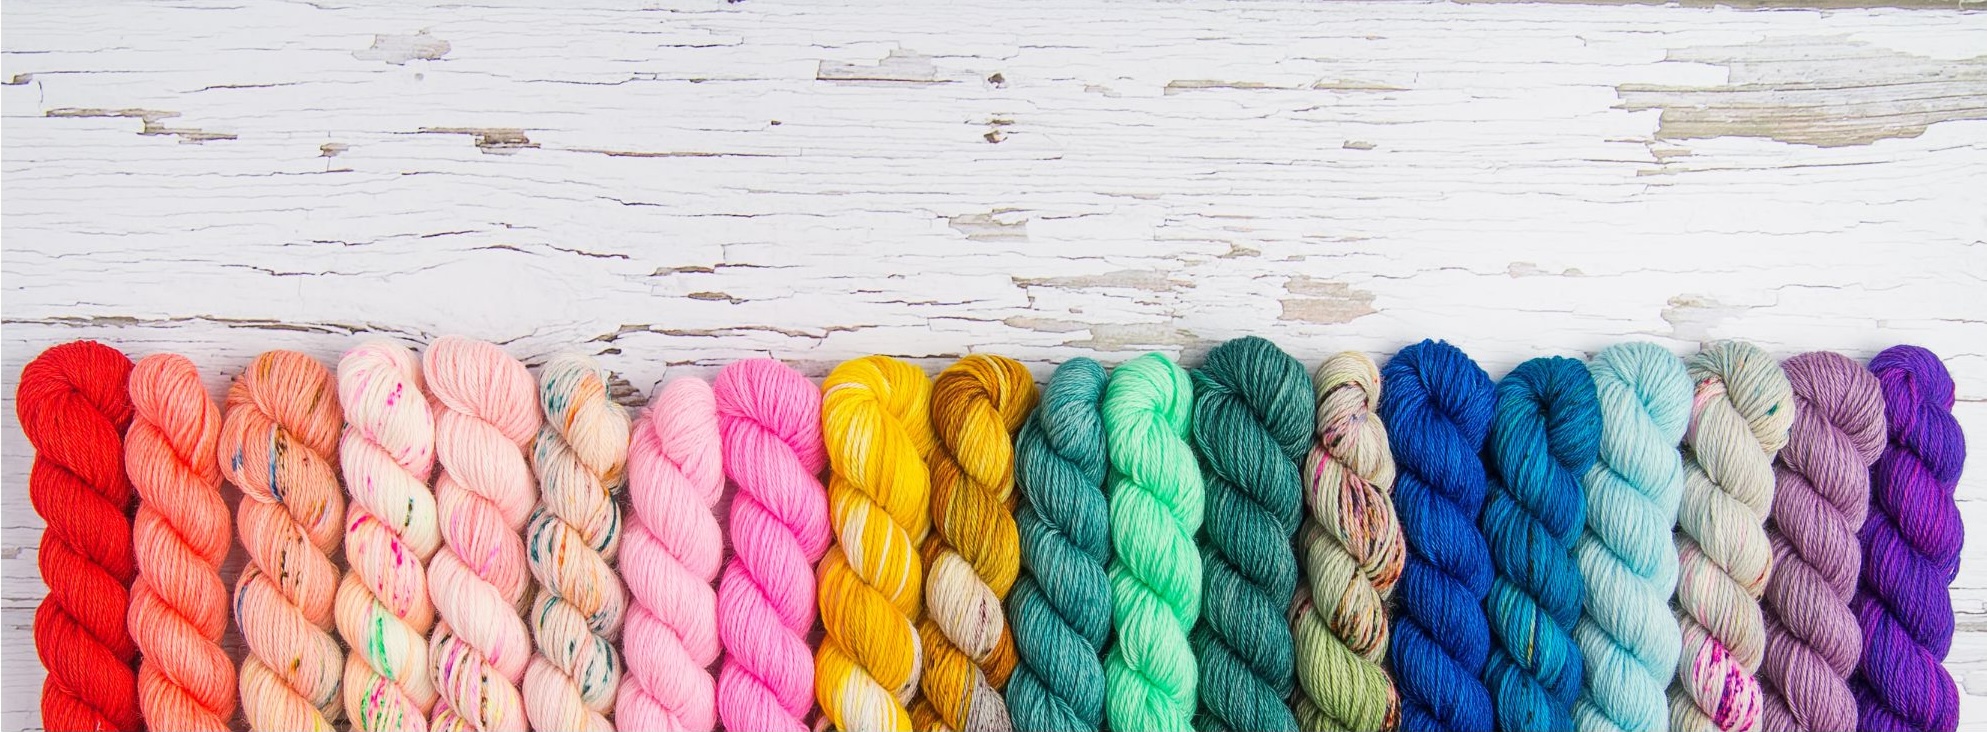 An image of 20 hanks of yarn on a piece of whitewashed wood. From left to right, the yarn colors range from red to coral to shades of pink with speckles of other color, two shades of yellow, shade of teal to a mint green to a darker heather green to a variegated with green and brown to blues and ends with a tonal purple. This is in reference to choosing yarn for crochet bottoms.